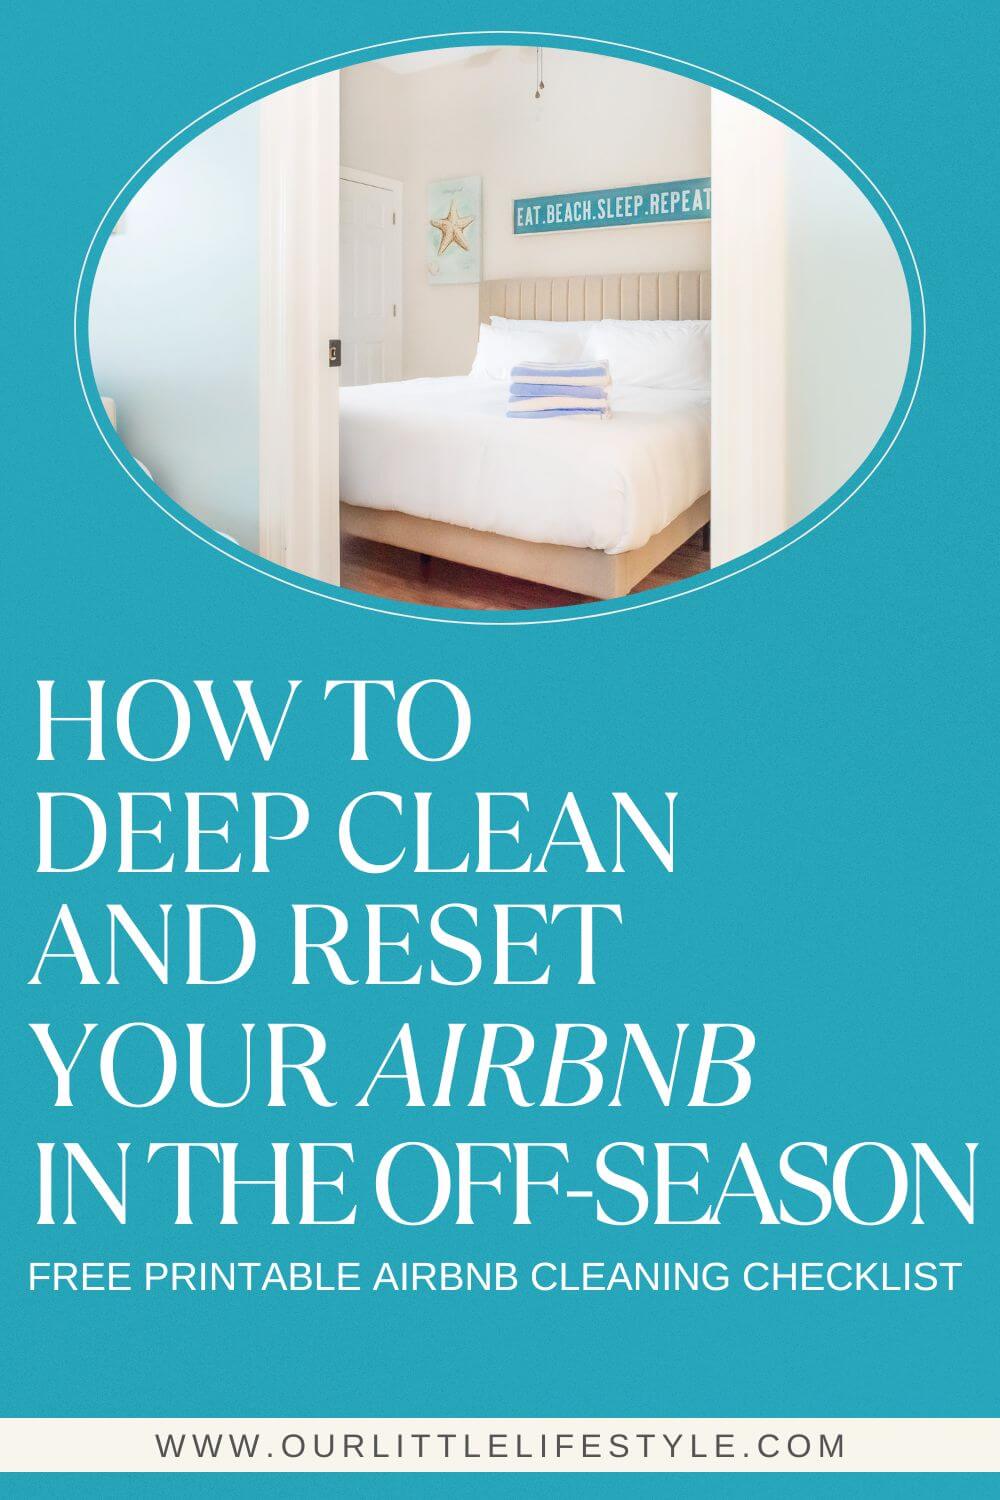 Deep Clean Your Airbnb